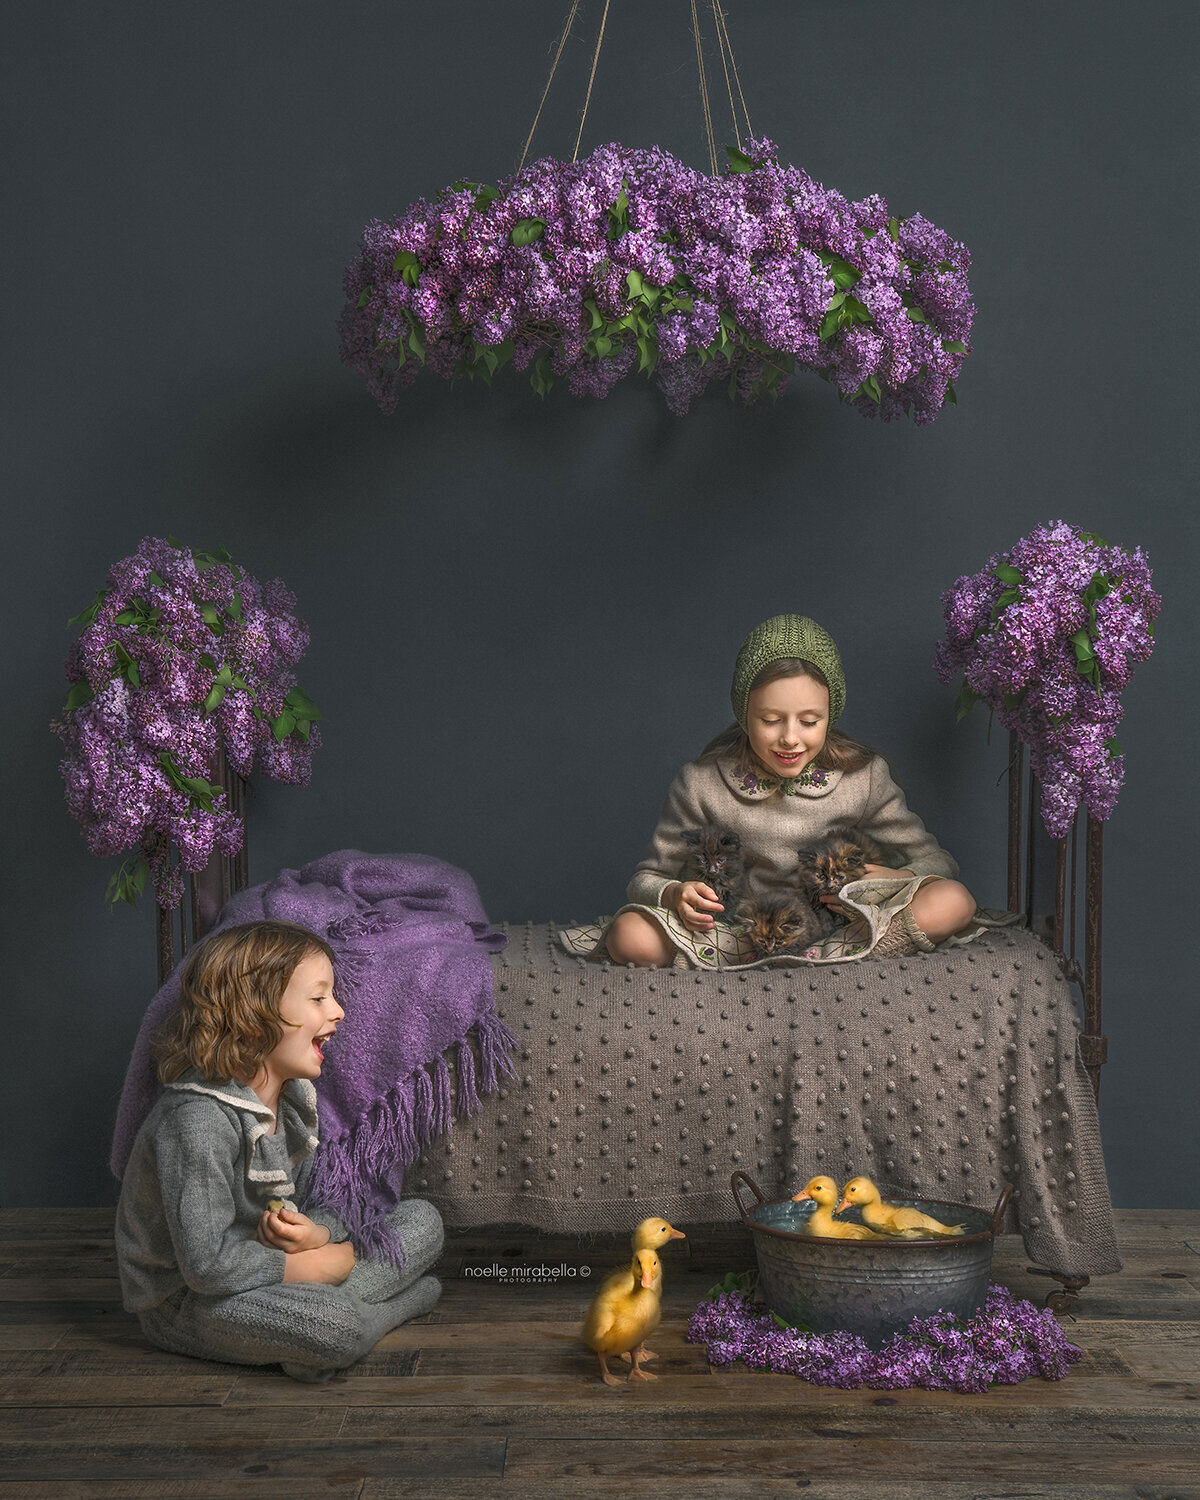 Children playing with baby duckklings on bed covered in fresh lilac blooms.